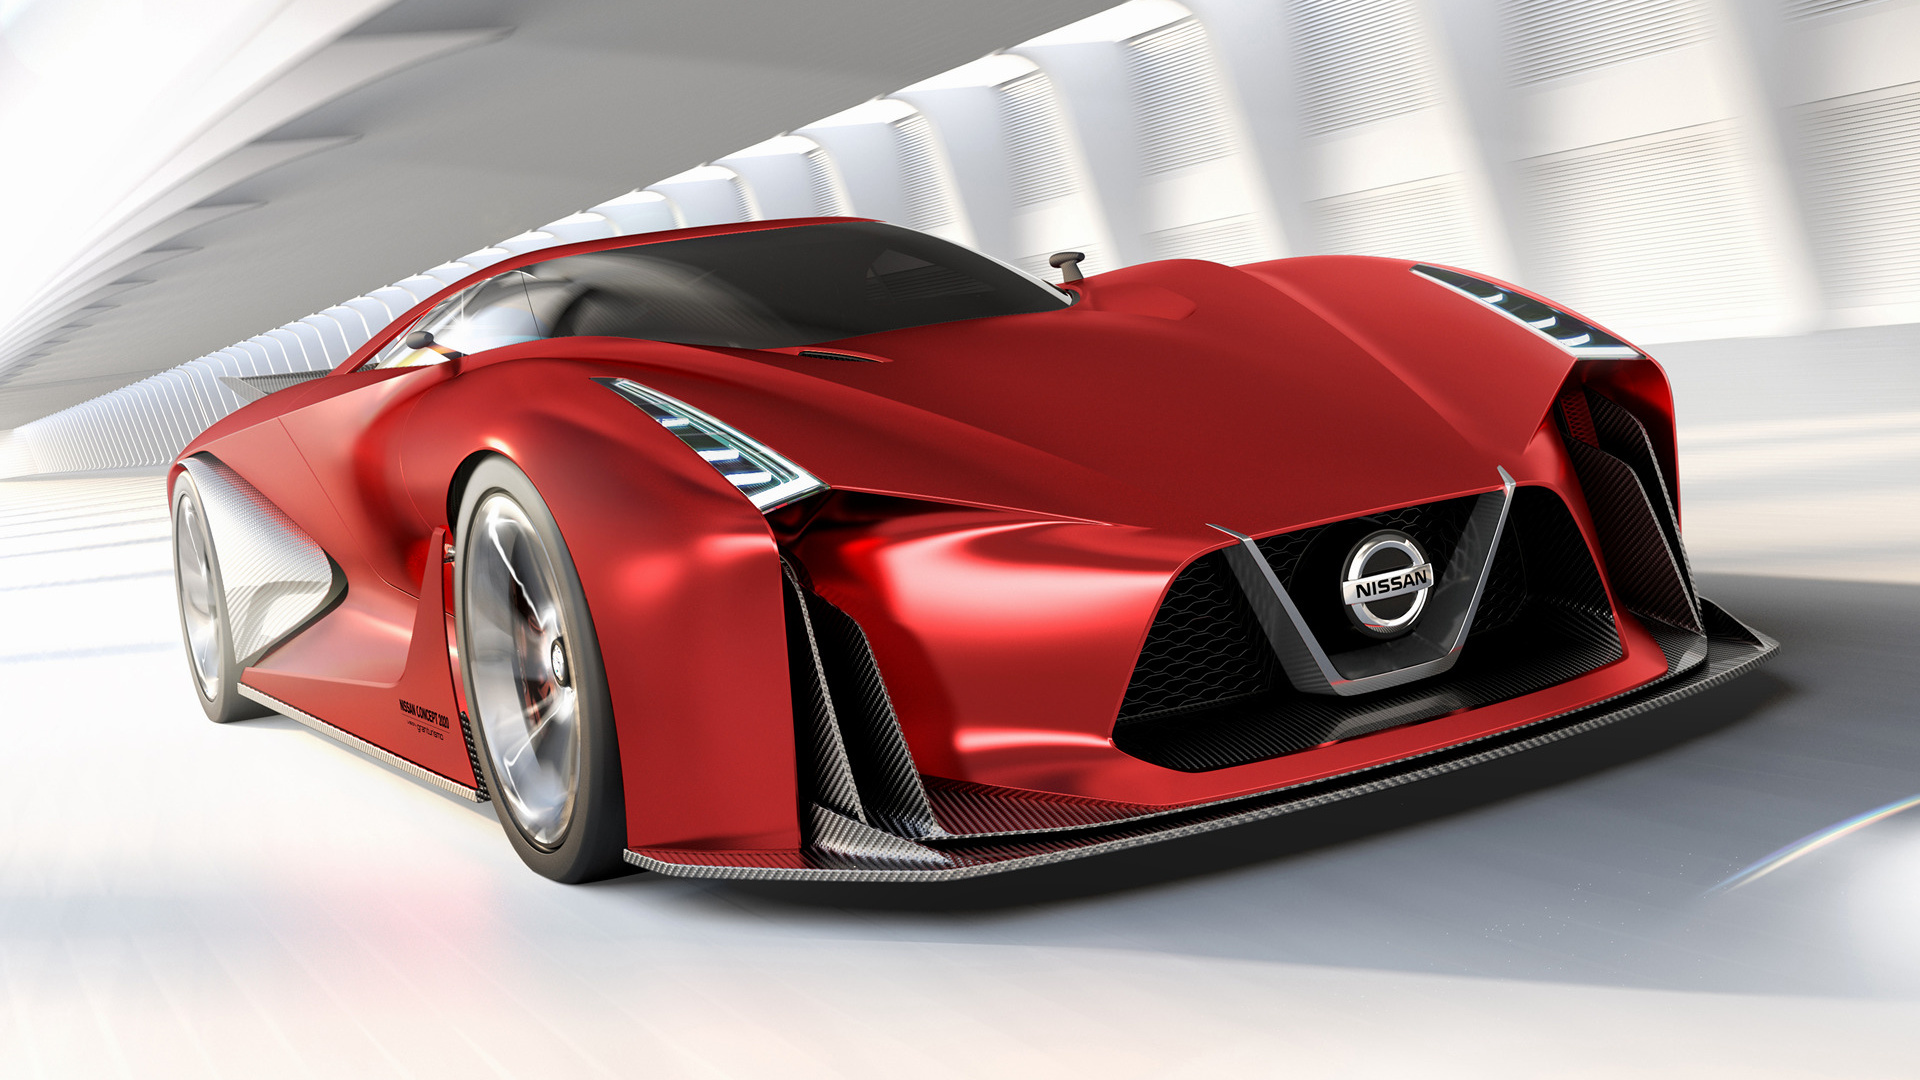 2015 Nissan Concept 2020 Vision Gran Turismo - Wallpapers 